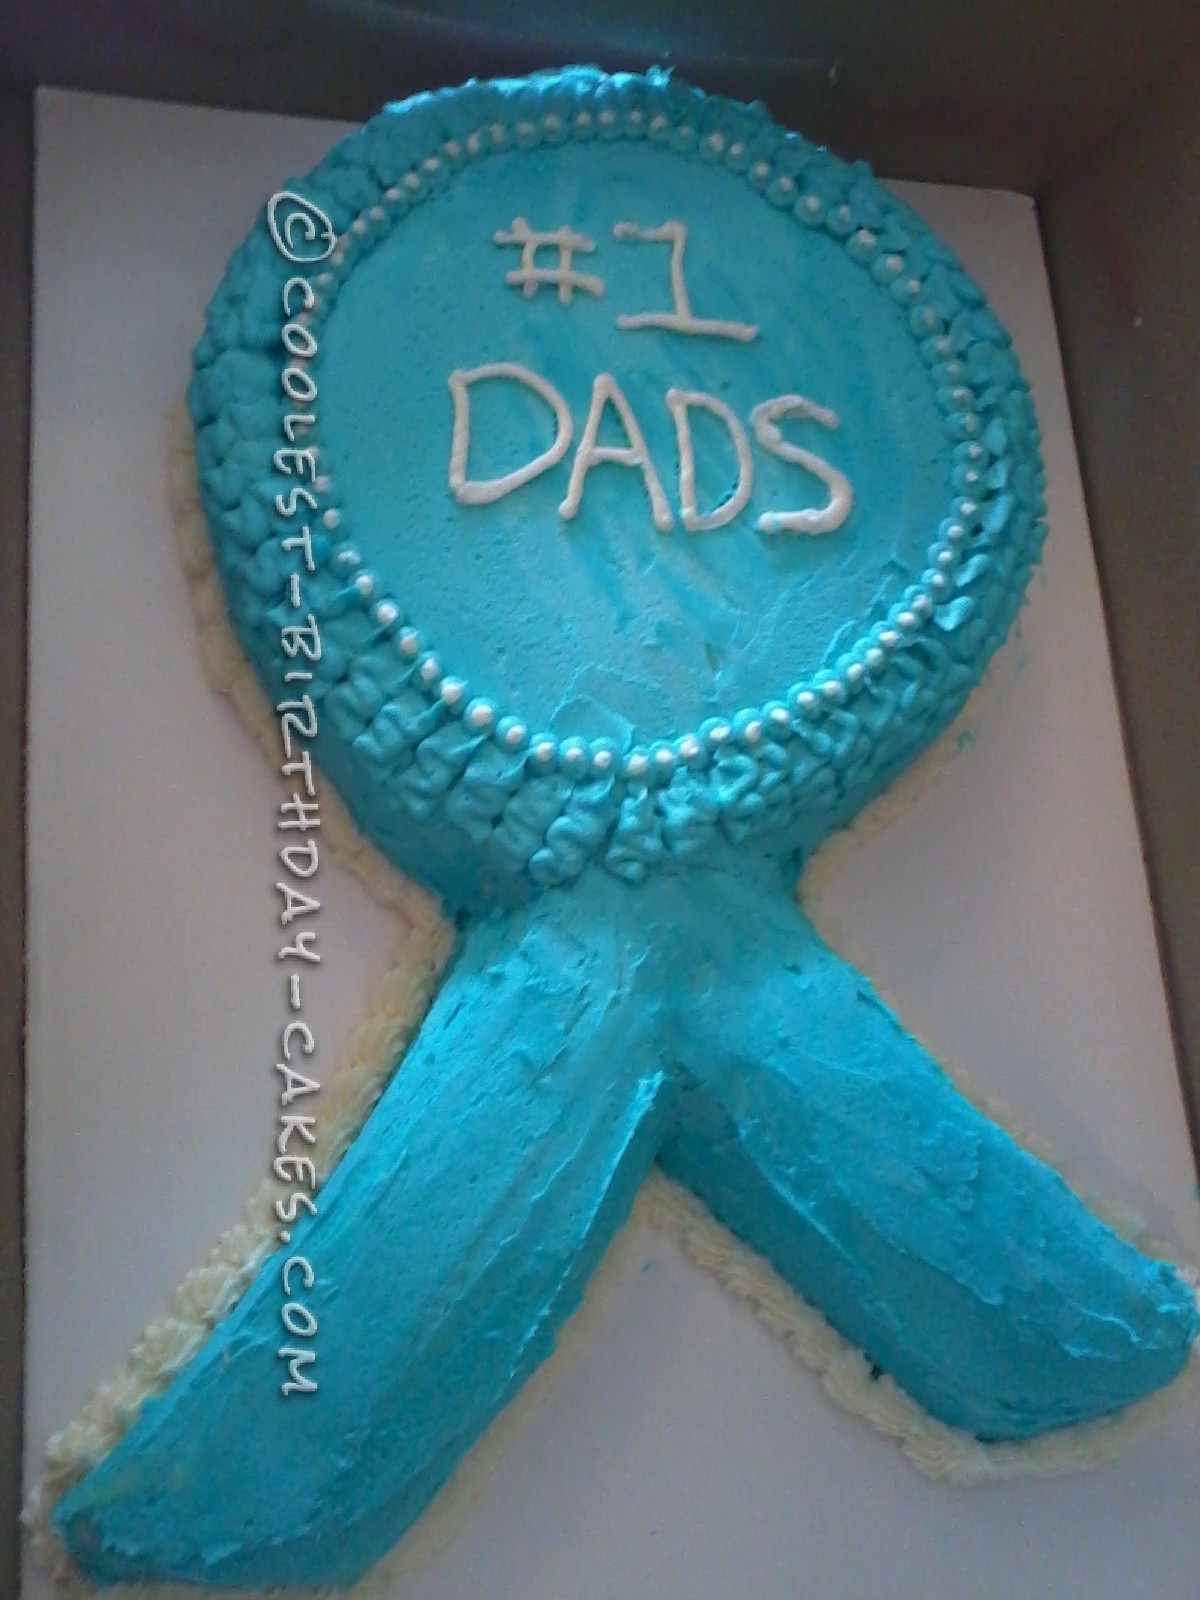 Coolest Fathers Day Cake